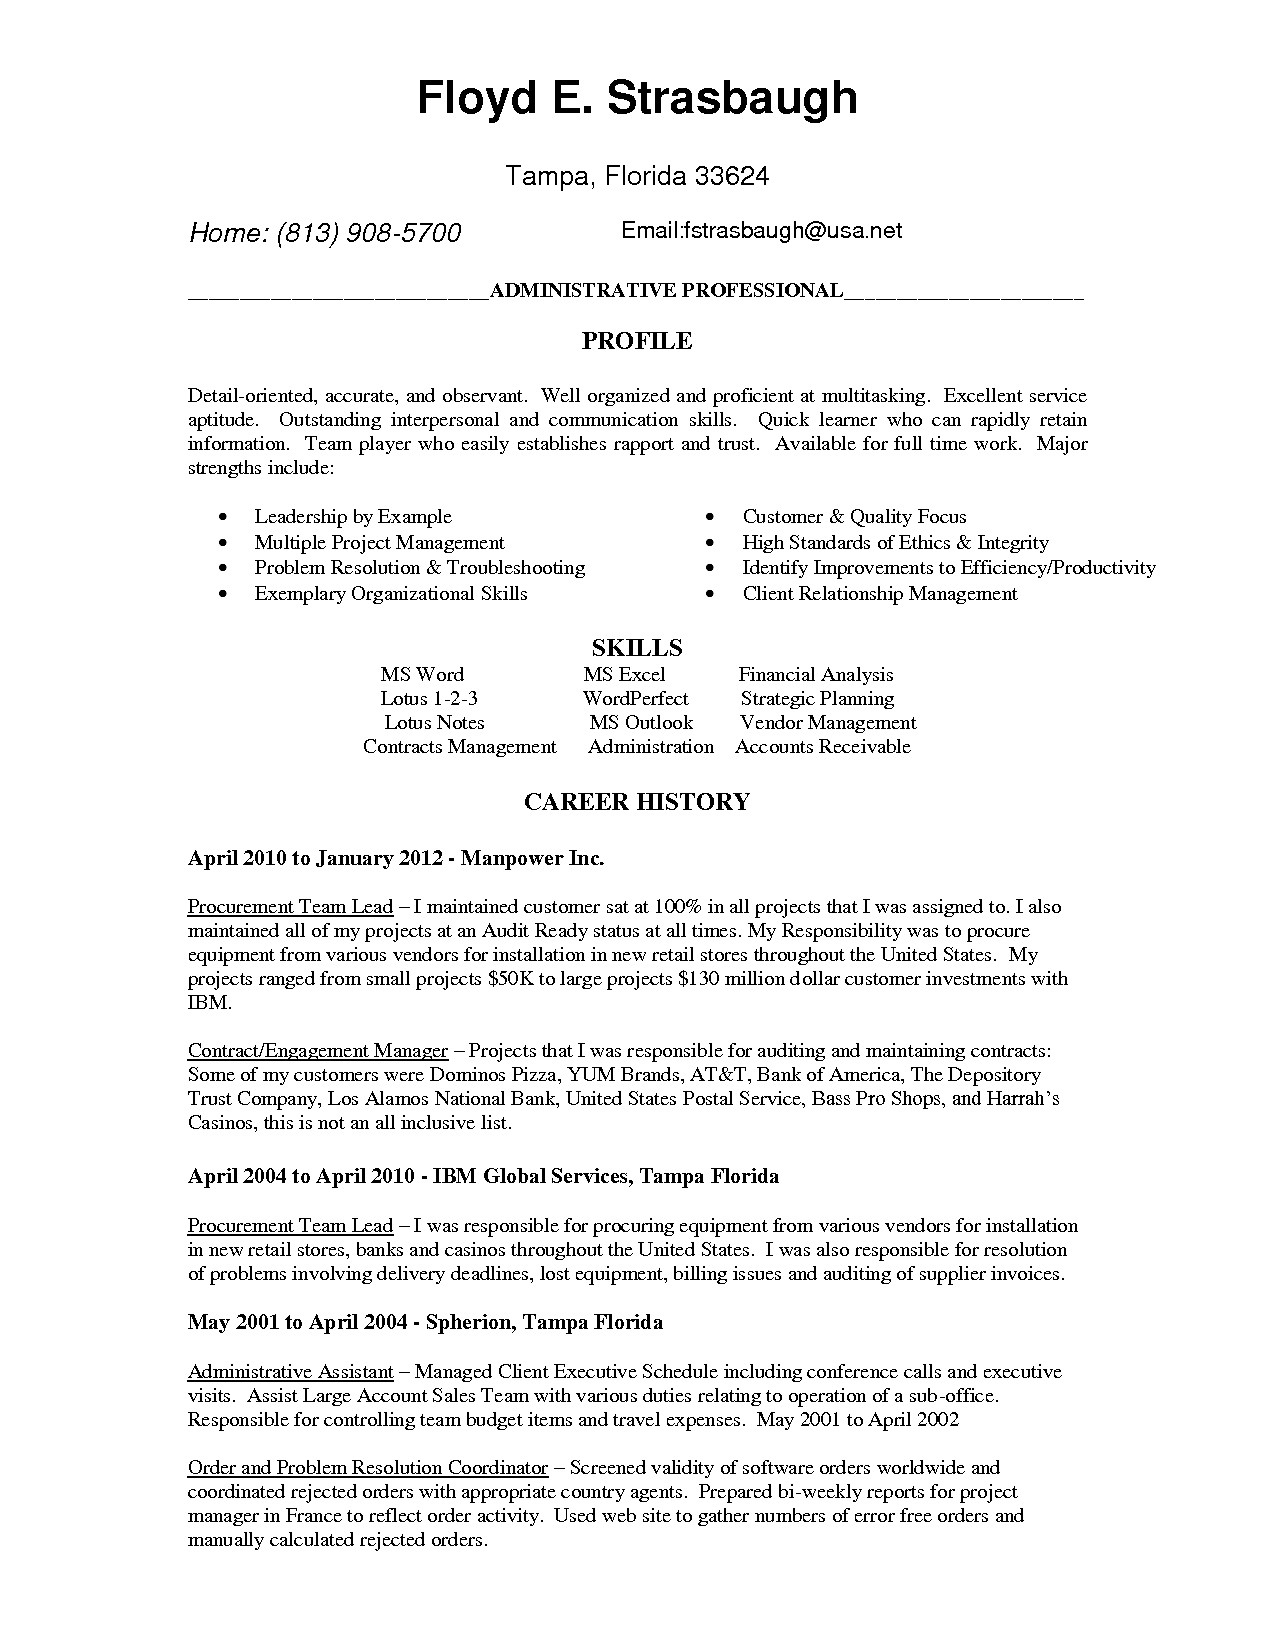 Cover Letter Template for Administrative assistant Job - Administrative assistant Cover Letter Template Beautiful Business